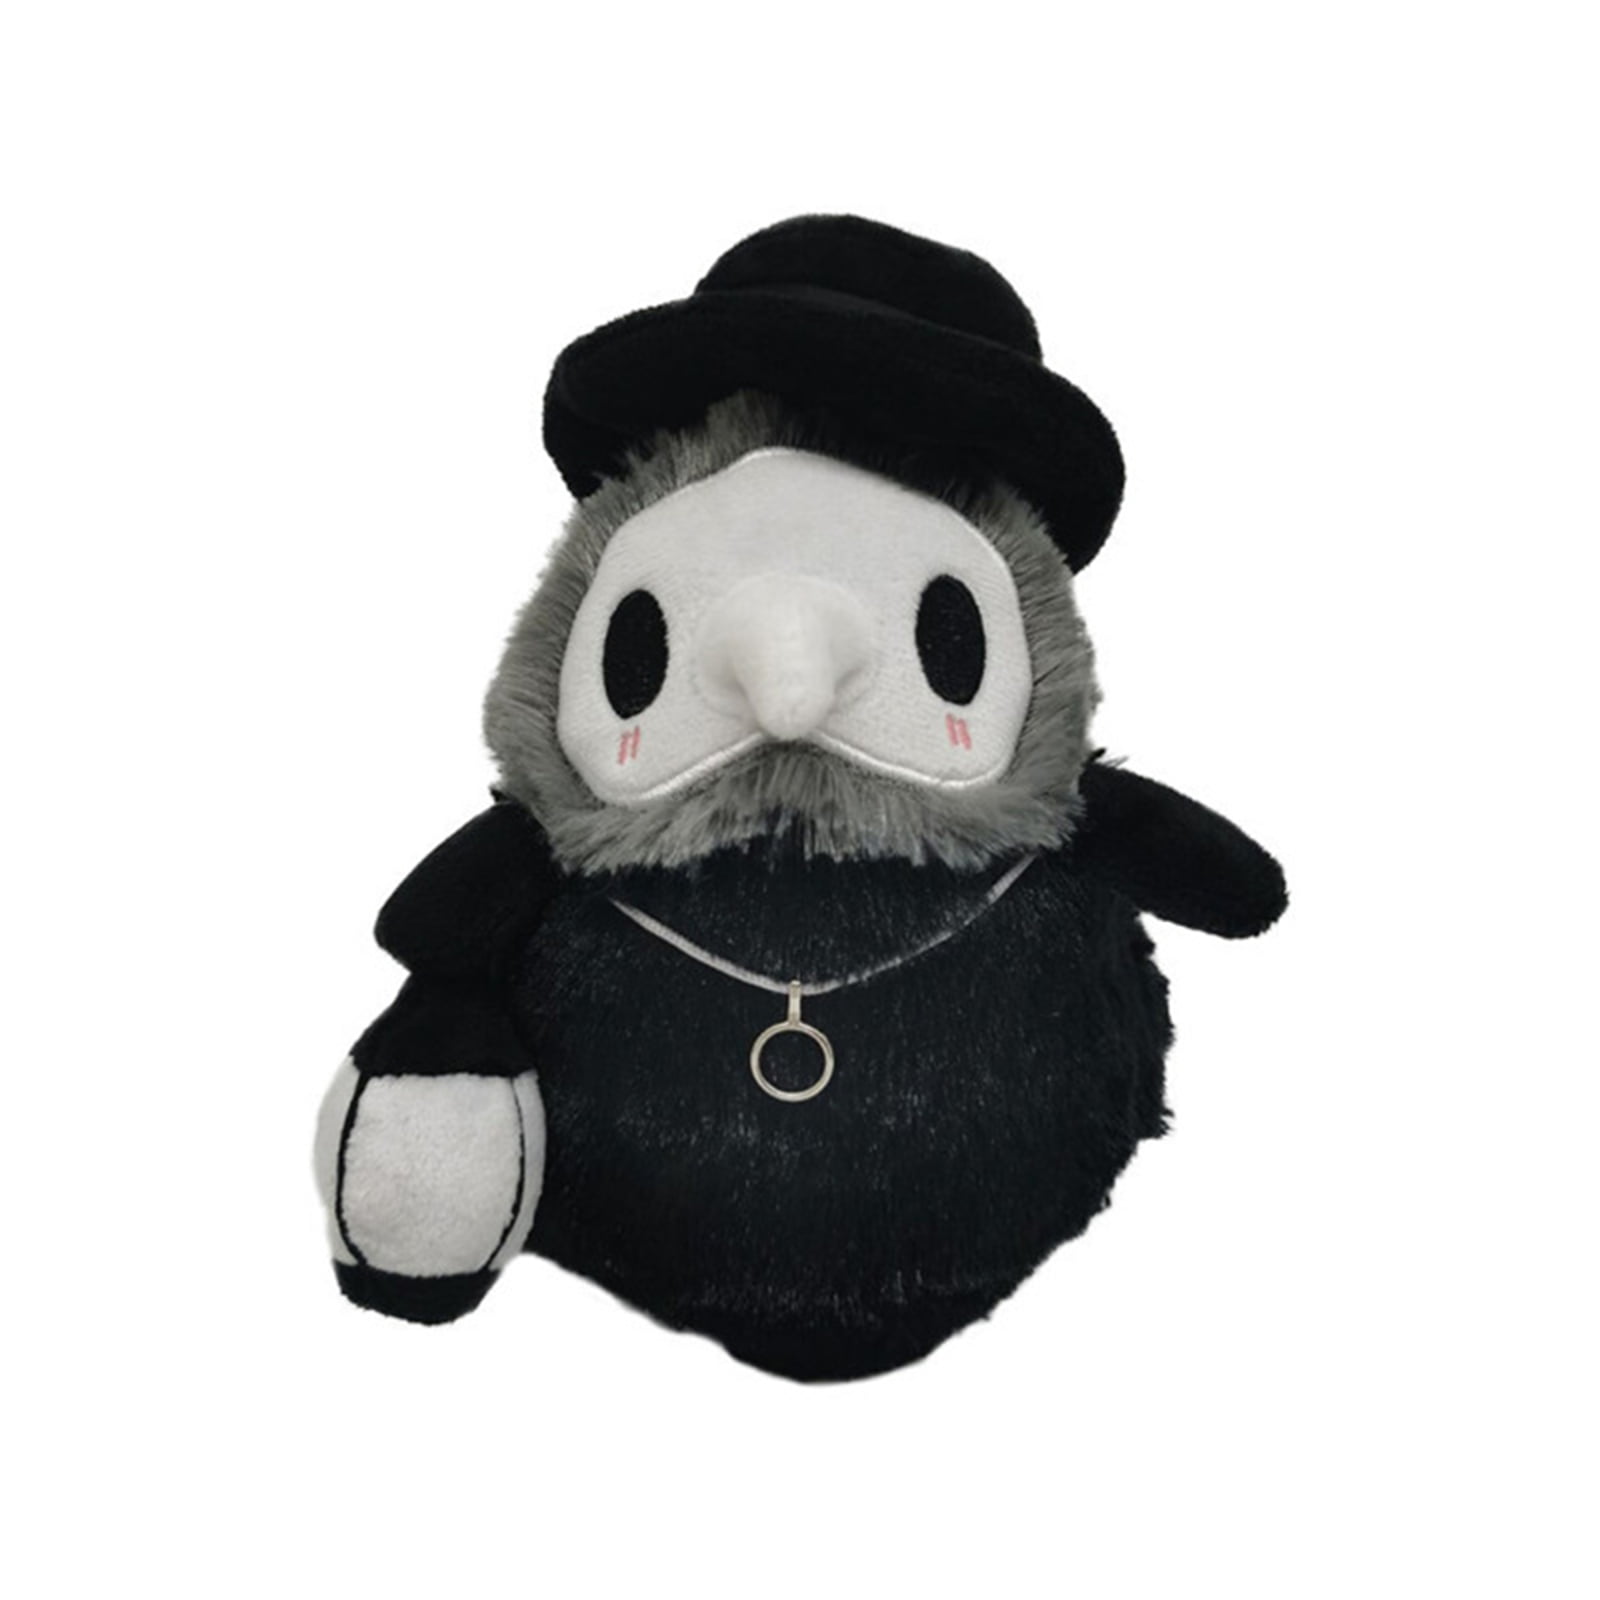 20cm Props Hand GLOW IN DARK Plague Doctor Toys Soft Plush Doll Halloween Gift 